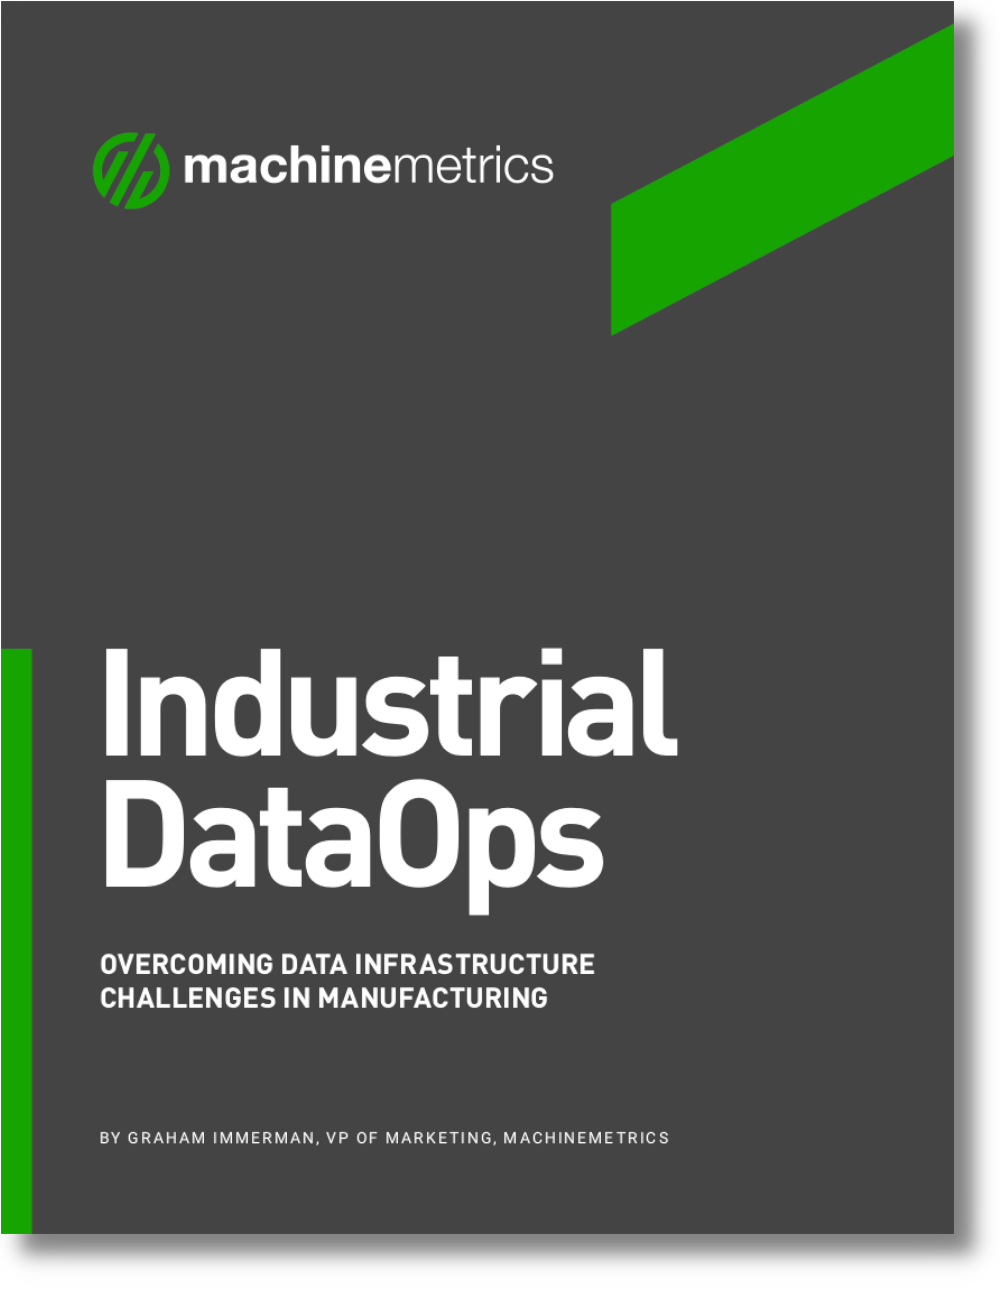 Industrial DataOps: Overcoming Data Infrastructure Challenges in Manufacturing